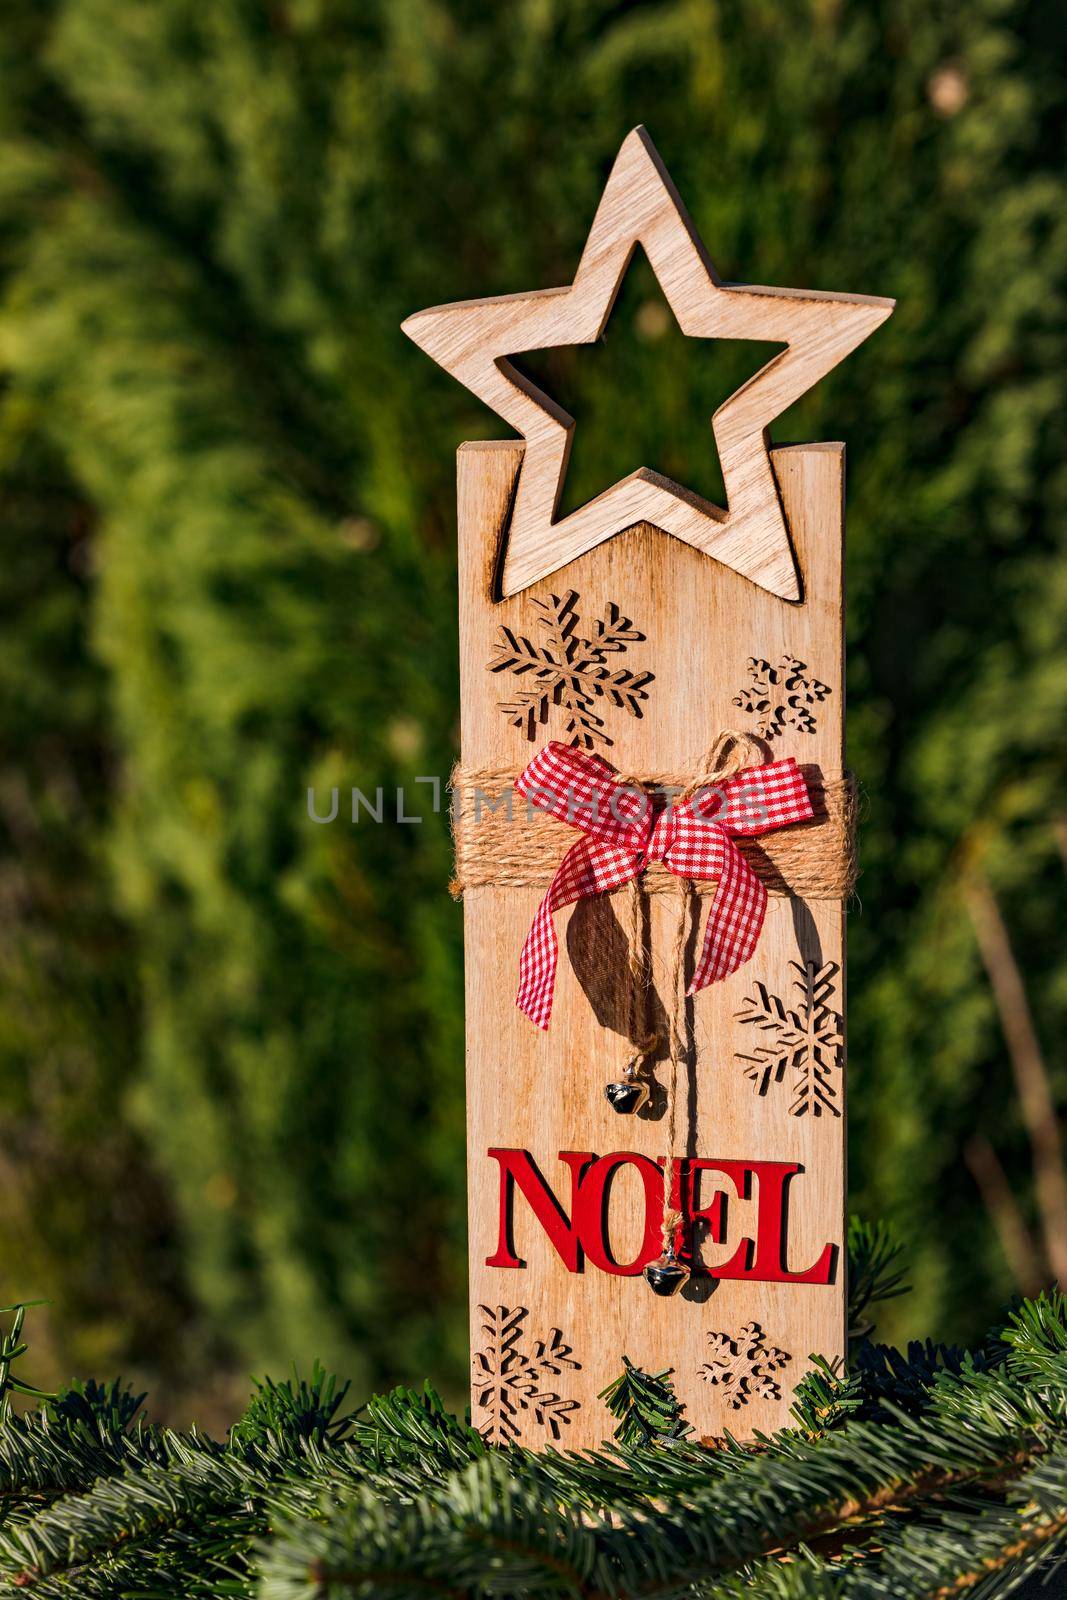 Wooden decoration elements for Christmas against a naturally green background